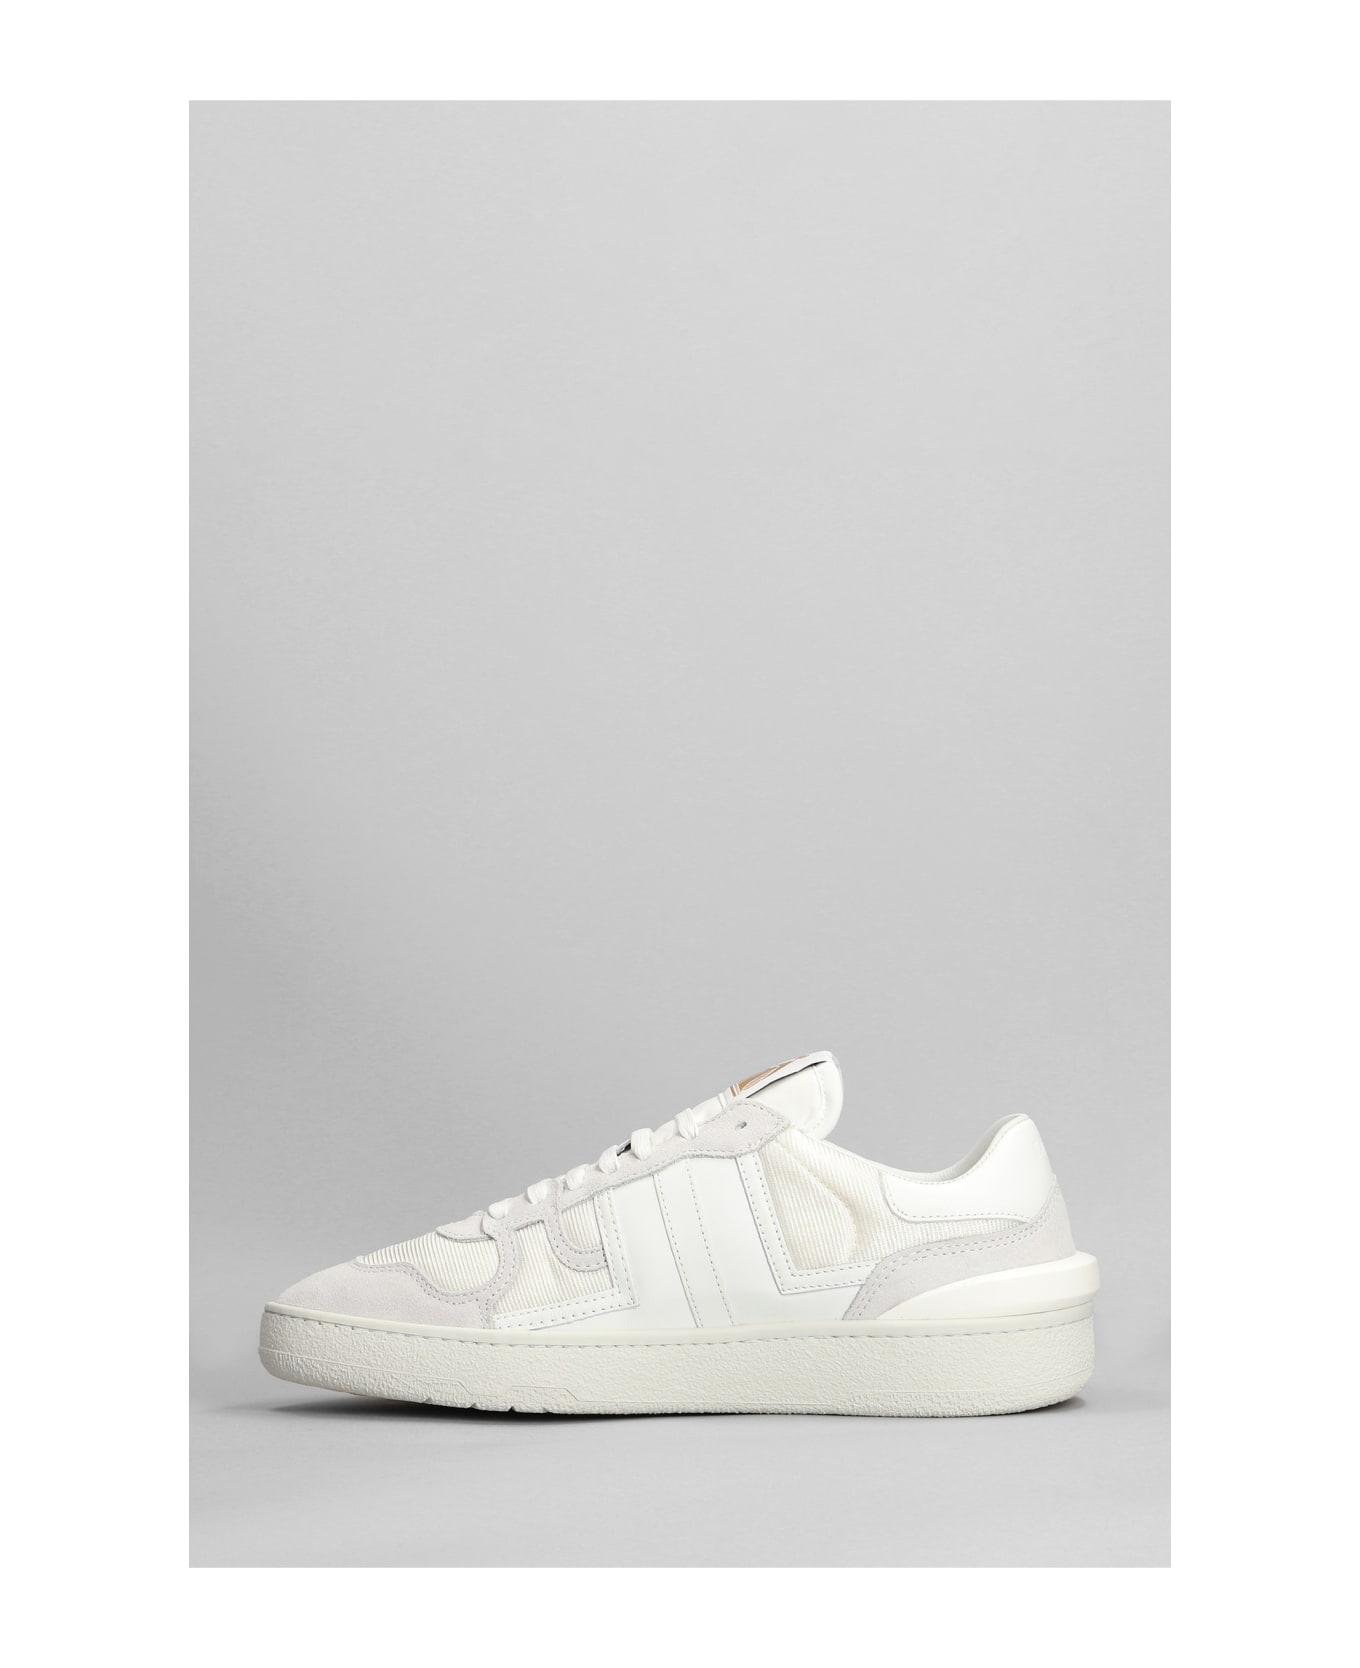 Lanvin Sneakers In White Leather - white